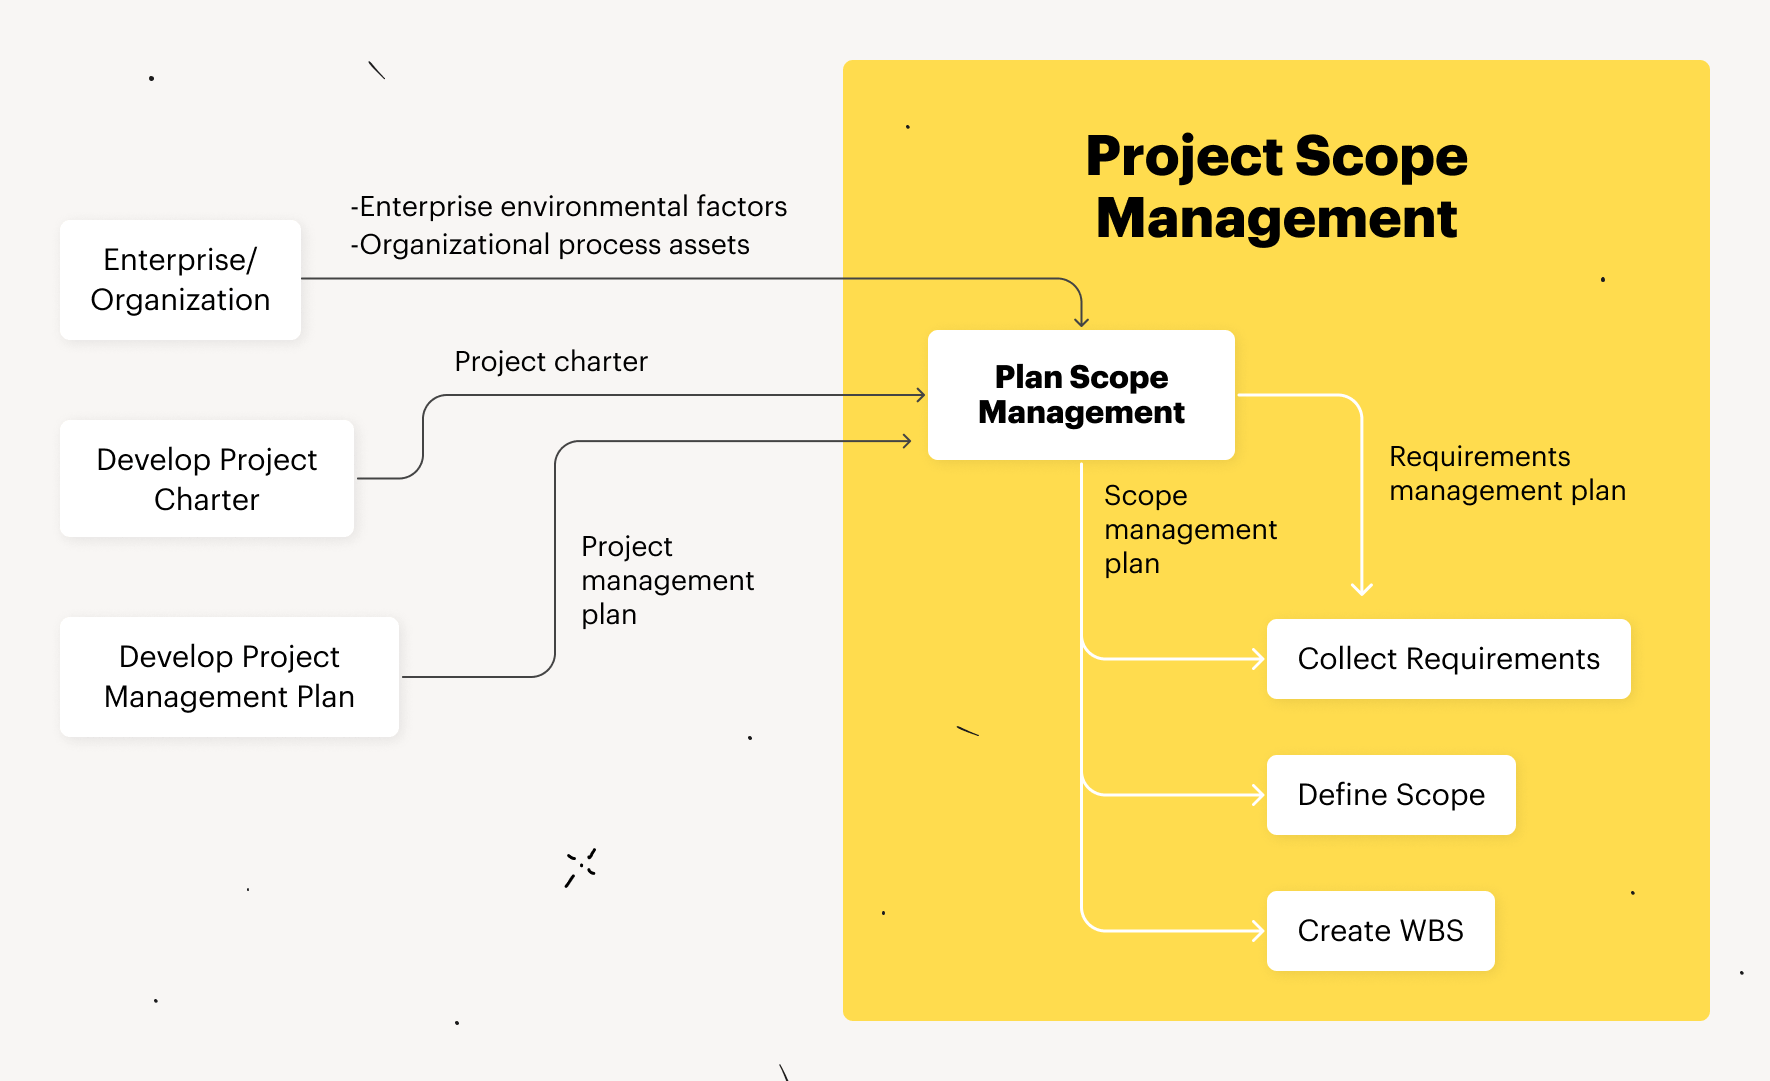 What is a Scope Management Plan